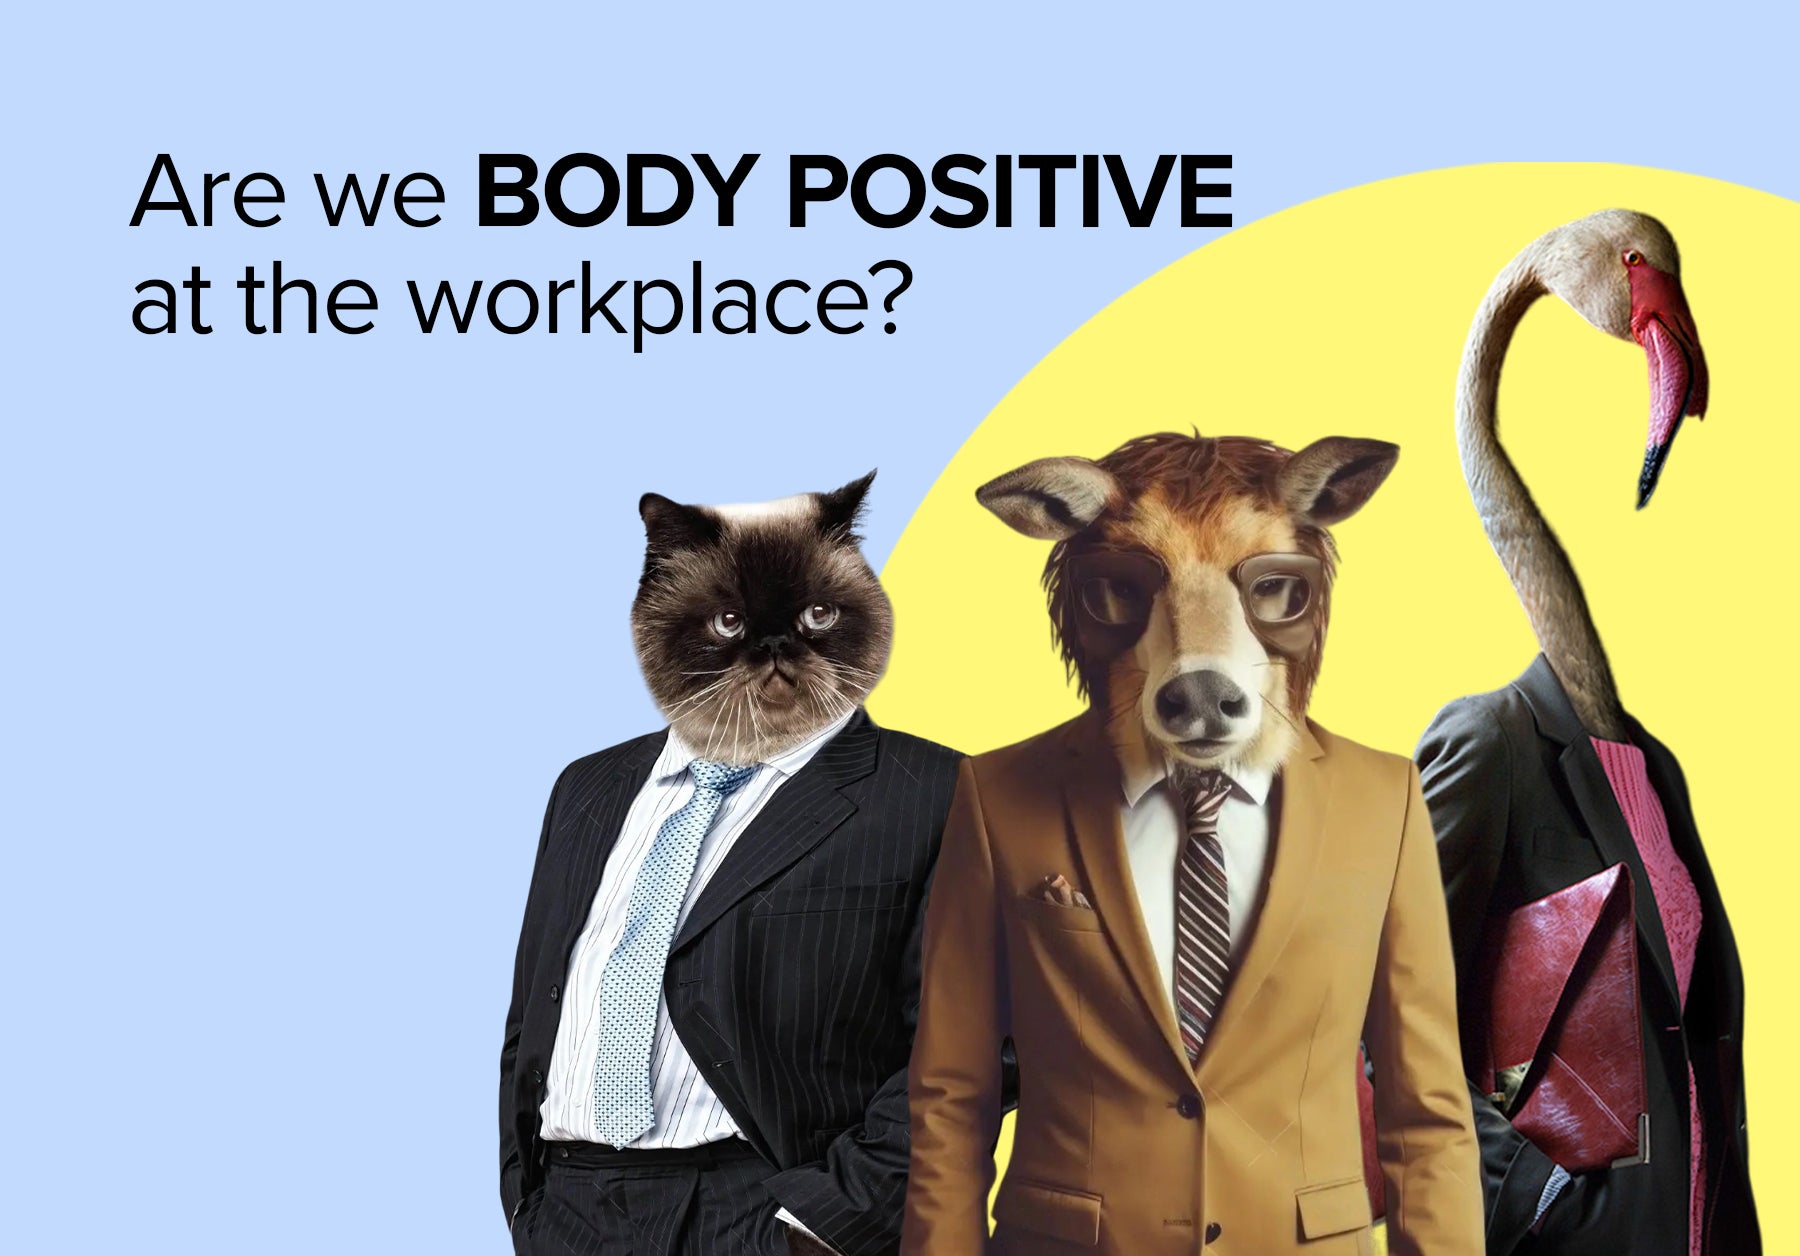 Are we body positive at the workplace?